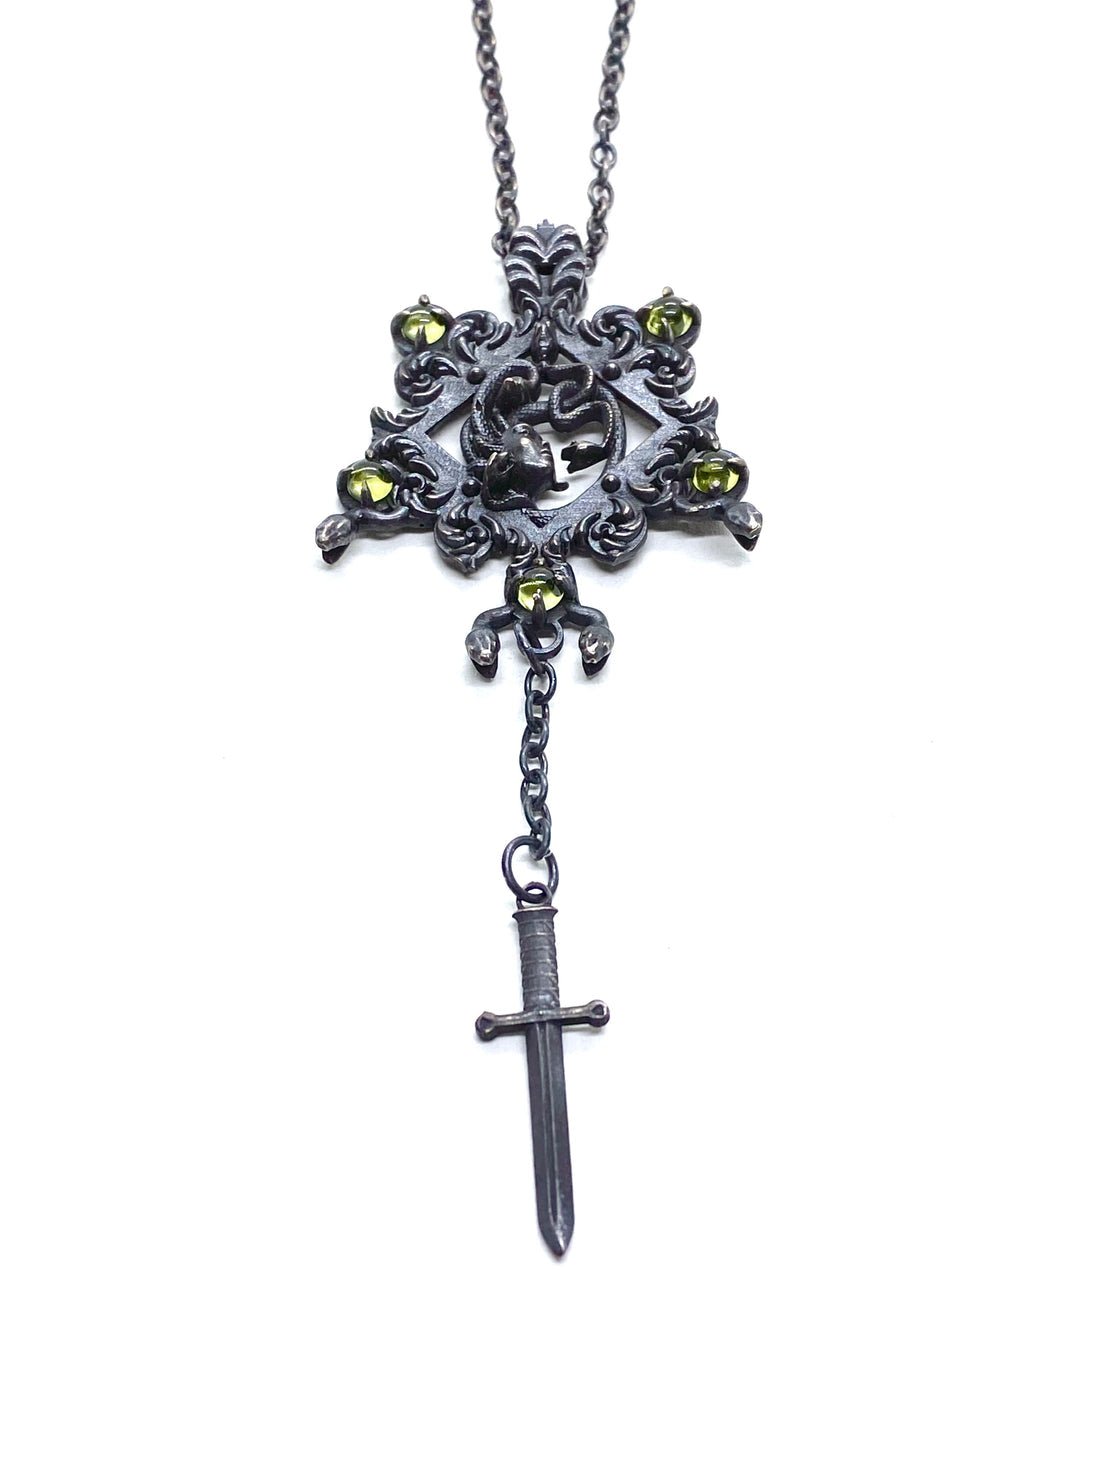 Medusa Shrine Necklace in Bronze and Peridot - Nocturne LLC